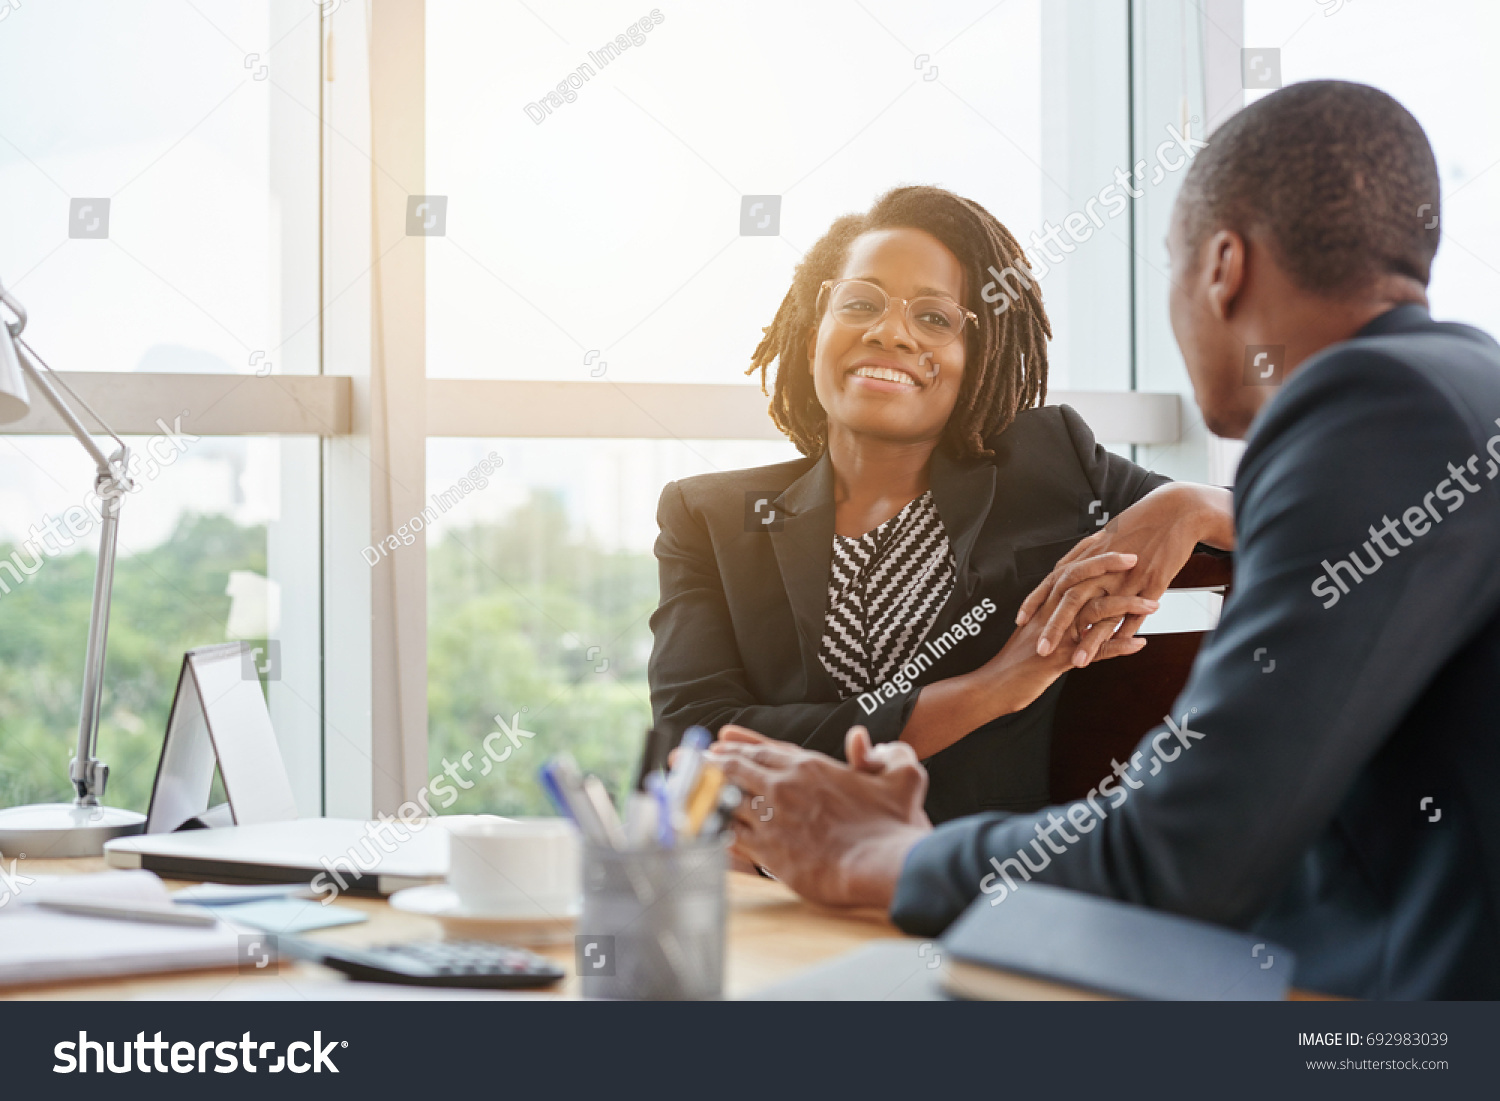 Beautiful smiling African-American business lady chatting with coworker #692983039